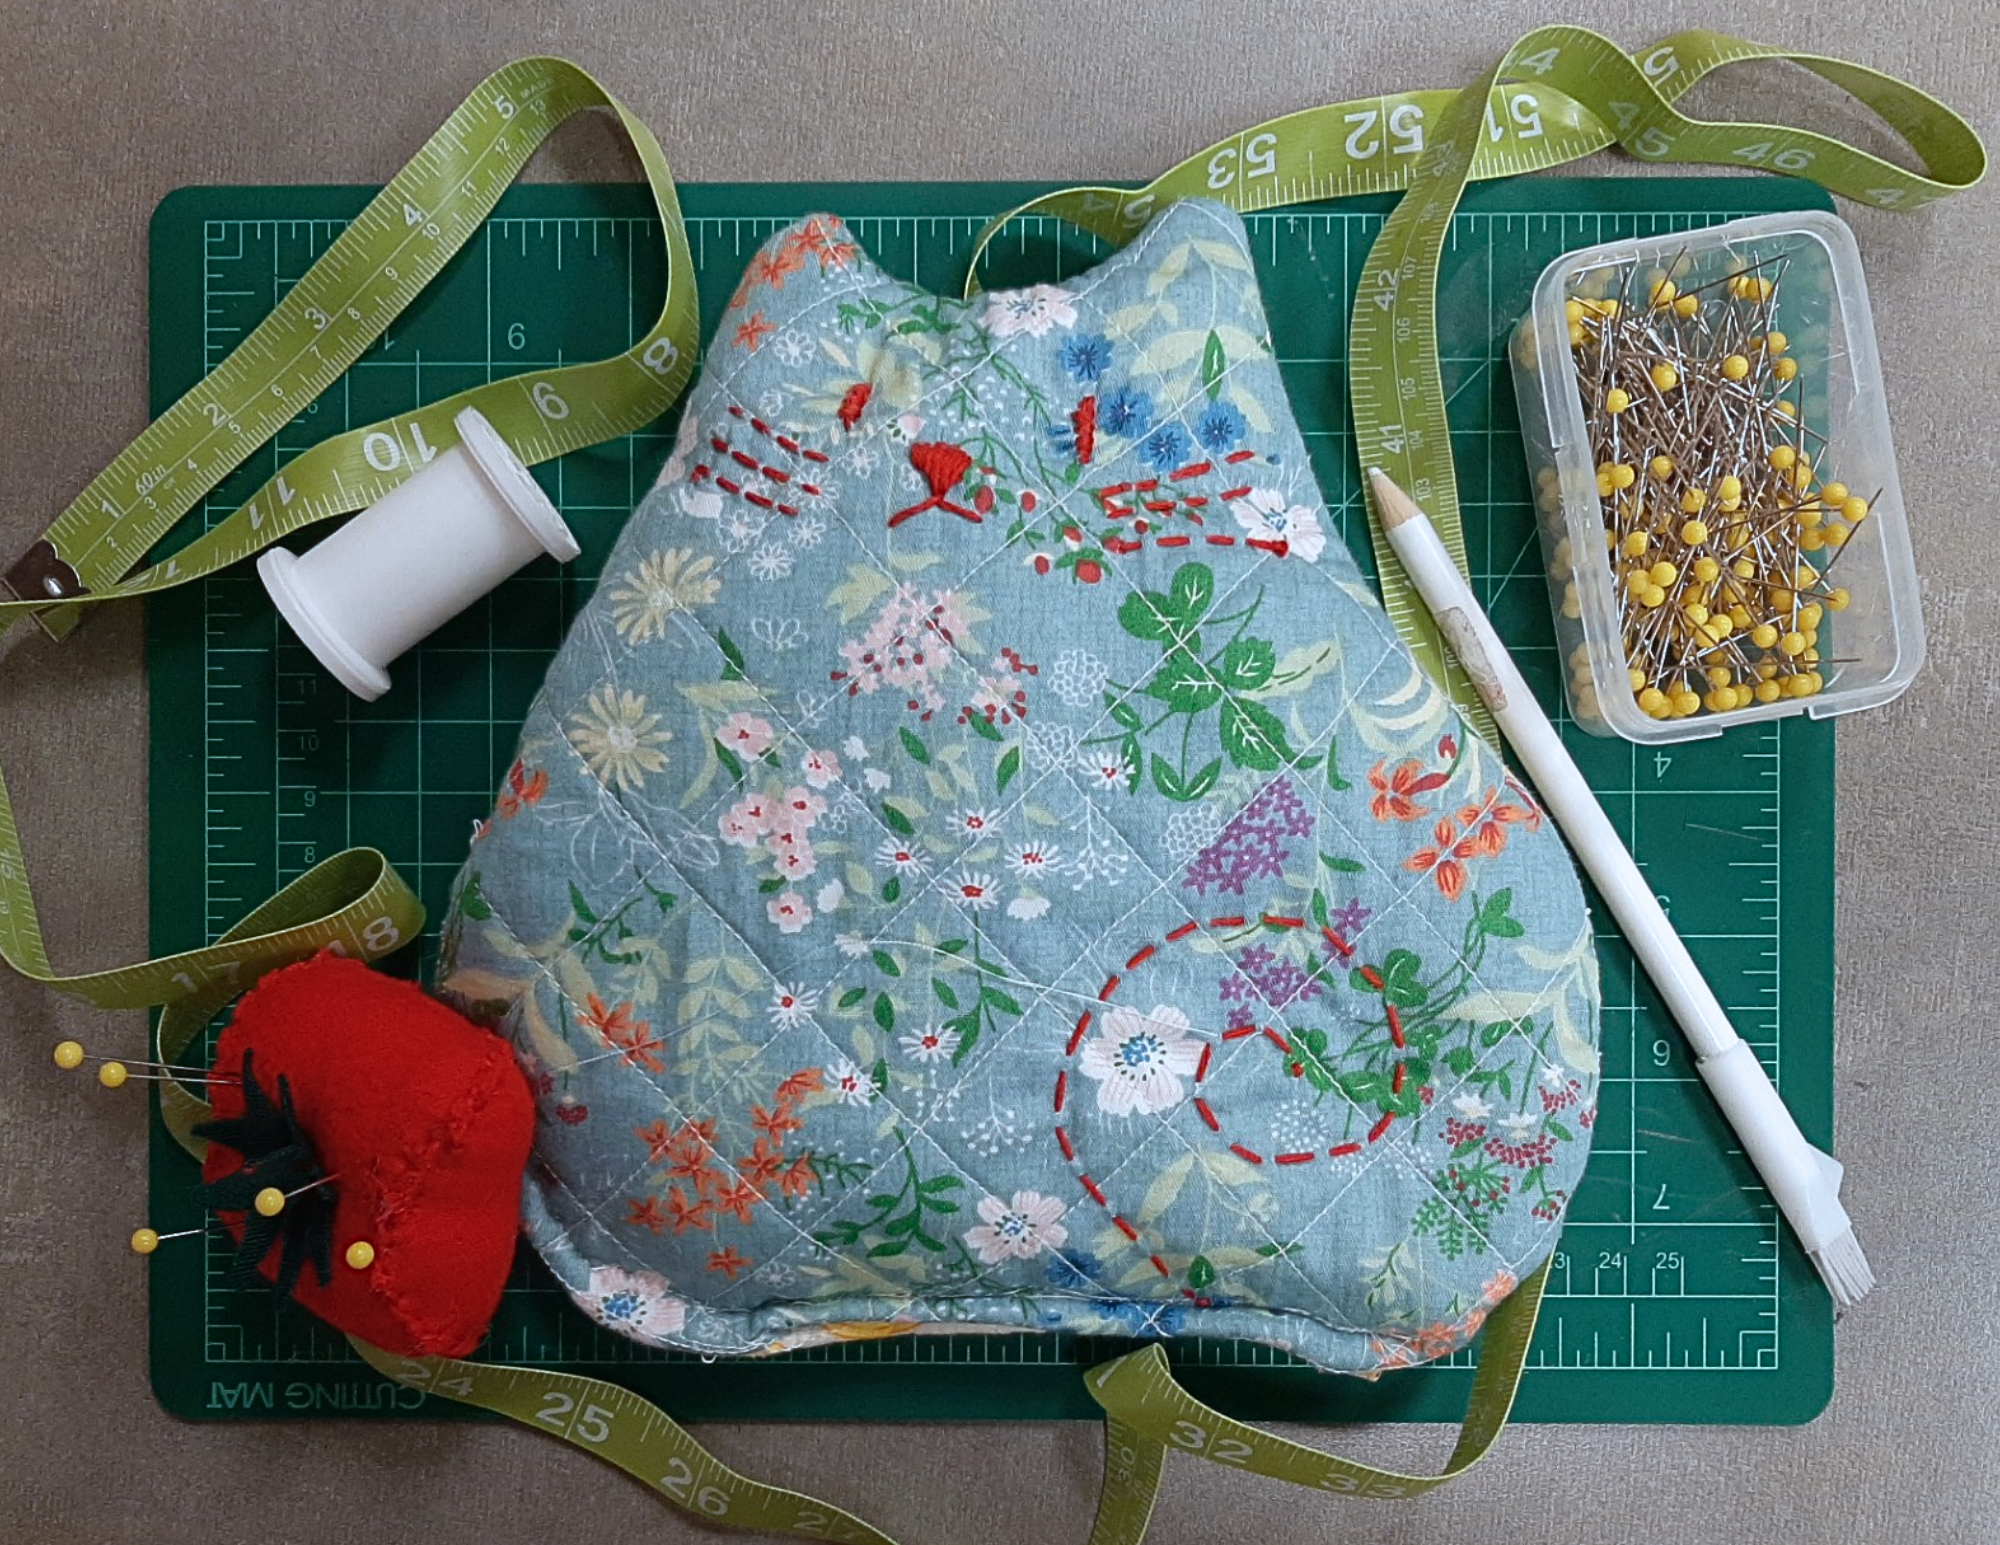 A cat shaped heating pad with embroidered details surrounded by sewing supplies 